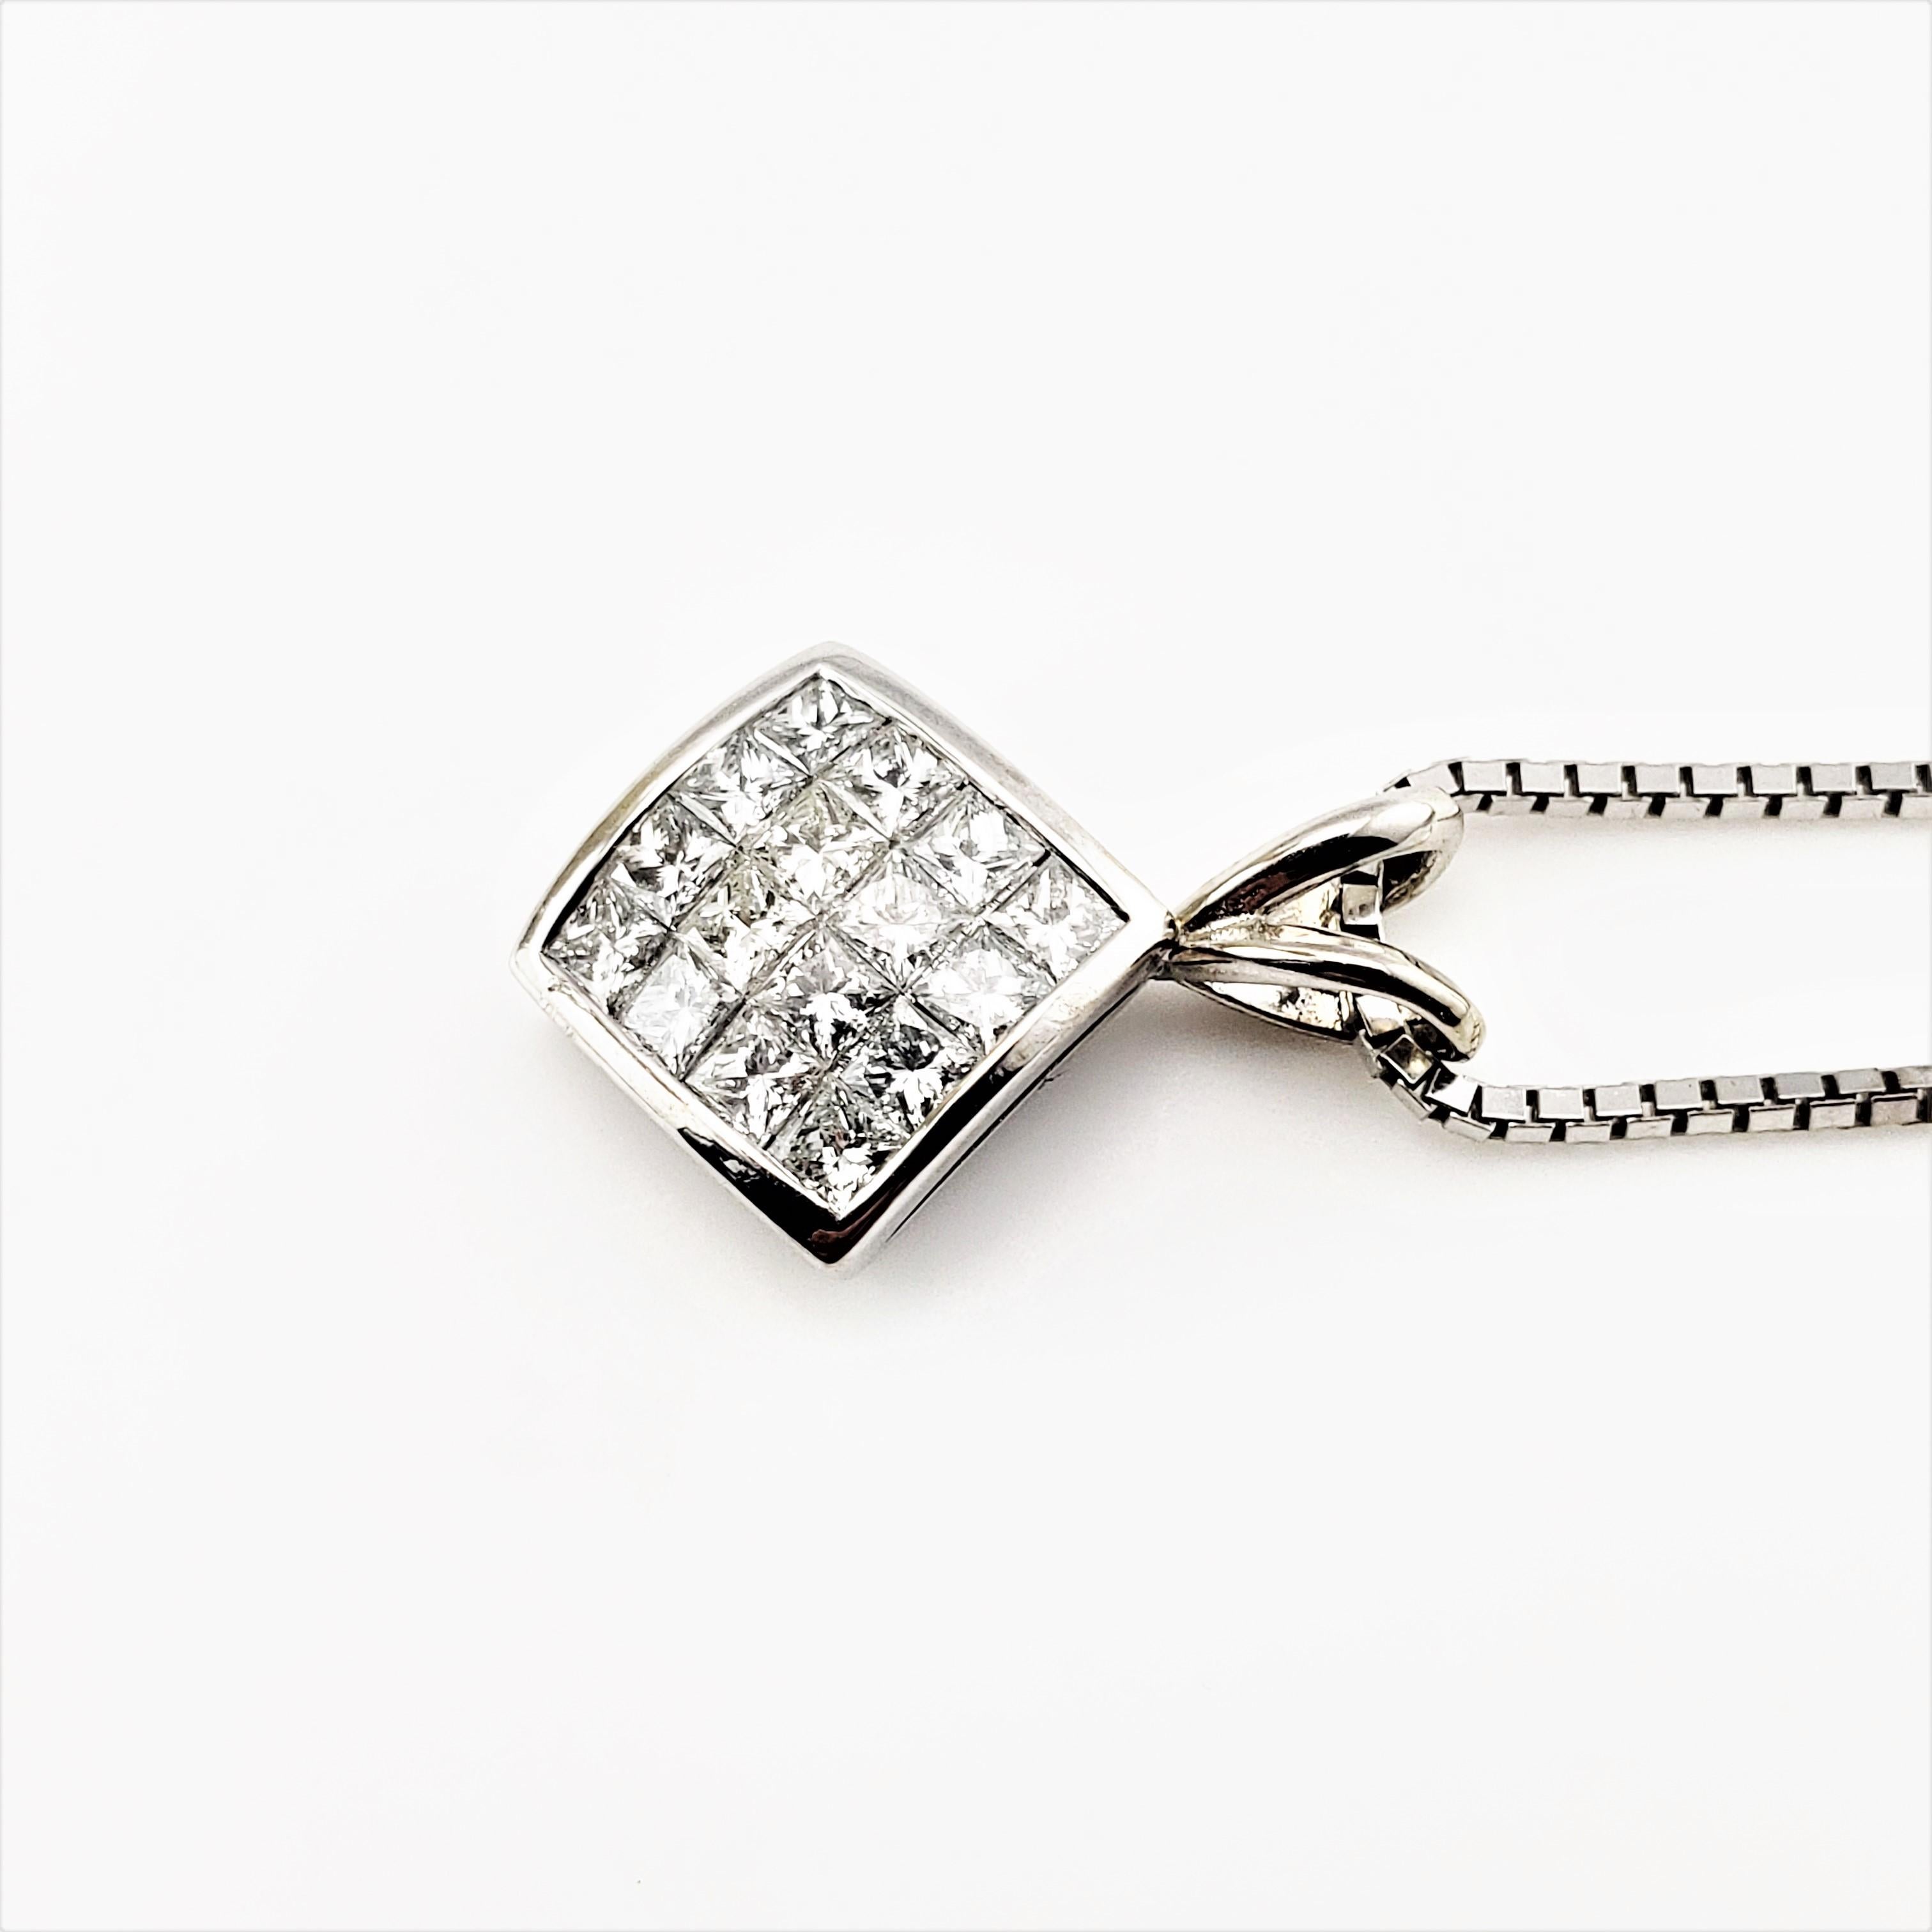 14 Karat White Gold Princess Cut Diamond Pendant Necklace-
 
This sparkling pendant features 16 princess cut diamonds set in classic 14K white gold.  Suspends from an 18 inch white gold necklace.

Approximate total diamond weight:  .80 ct.

Diamond